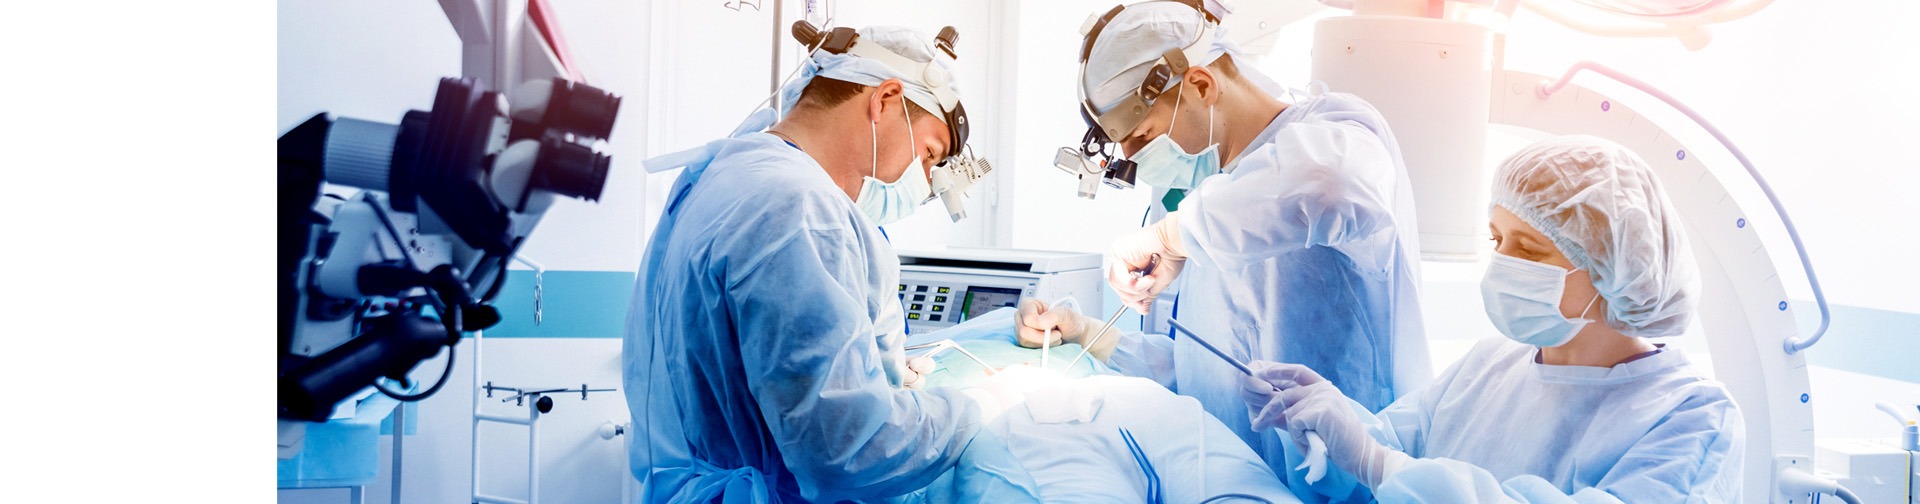 Surgery team performing a procedure.